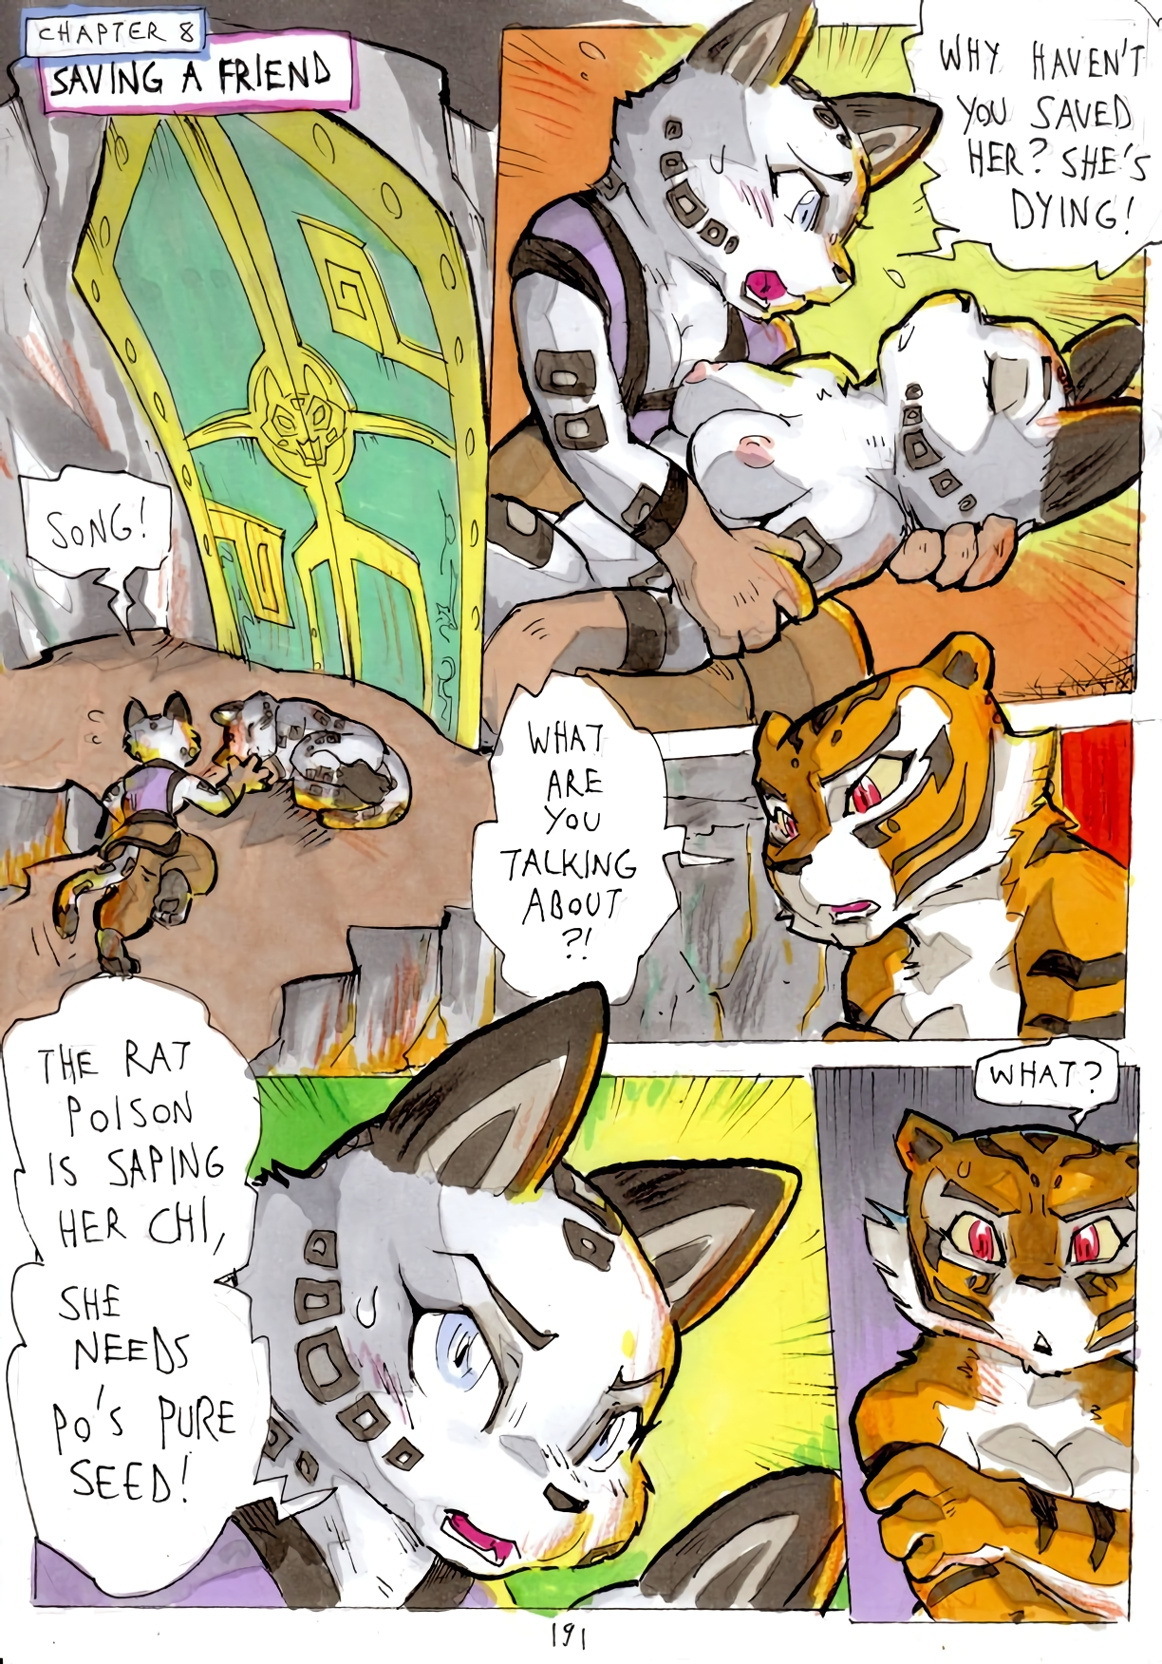 Better Late than Never 2 - Page 46